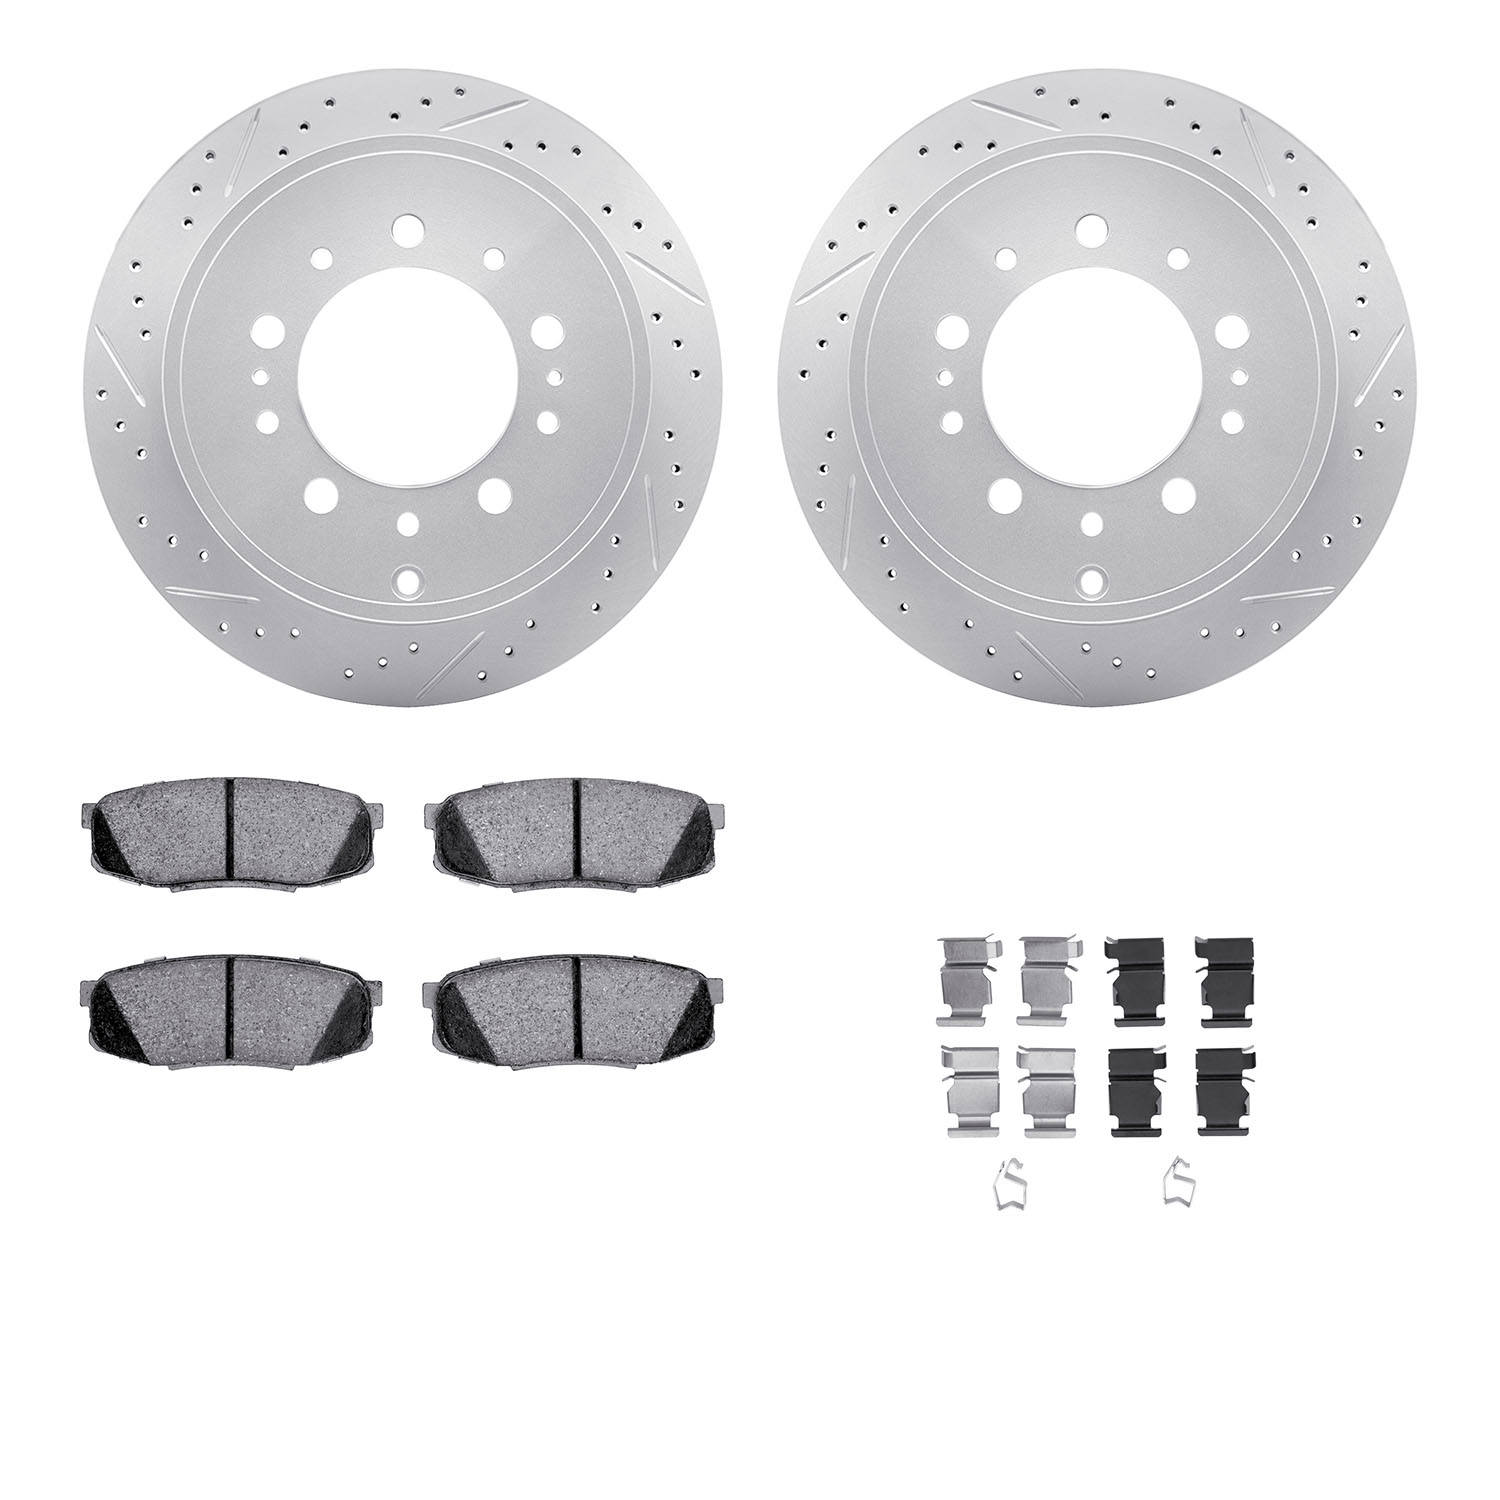 2212-76006 Geoperformance Drilled/Slotted Rotors w/Heavy-Duty Pads Kit & Hardware, Fits Select Lexus/Toyota/Scion, Position: Rea